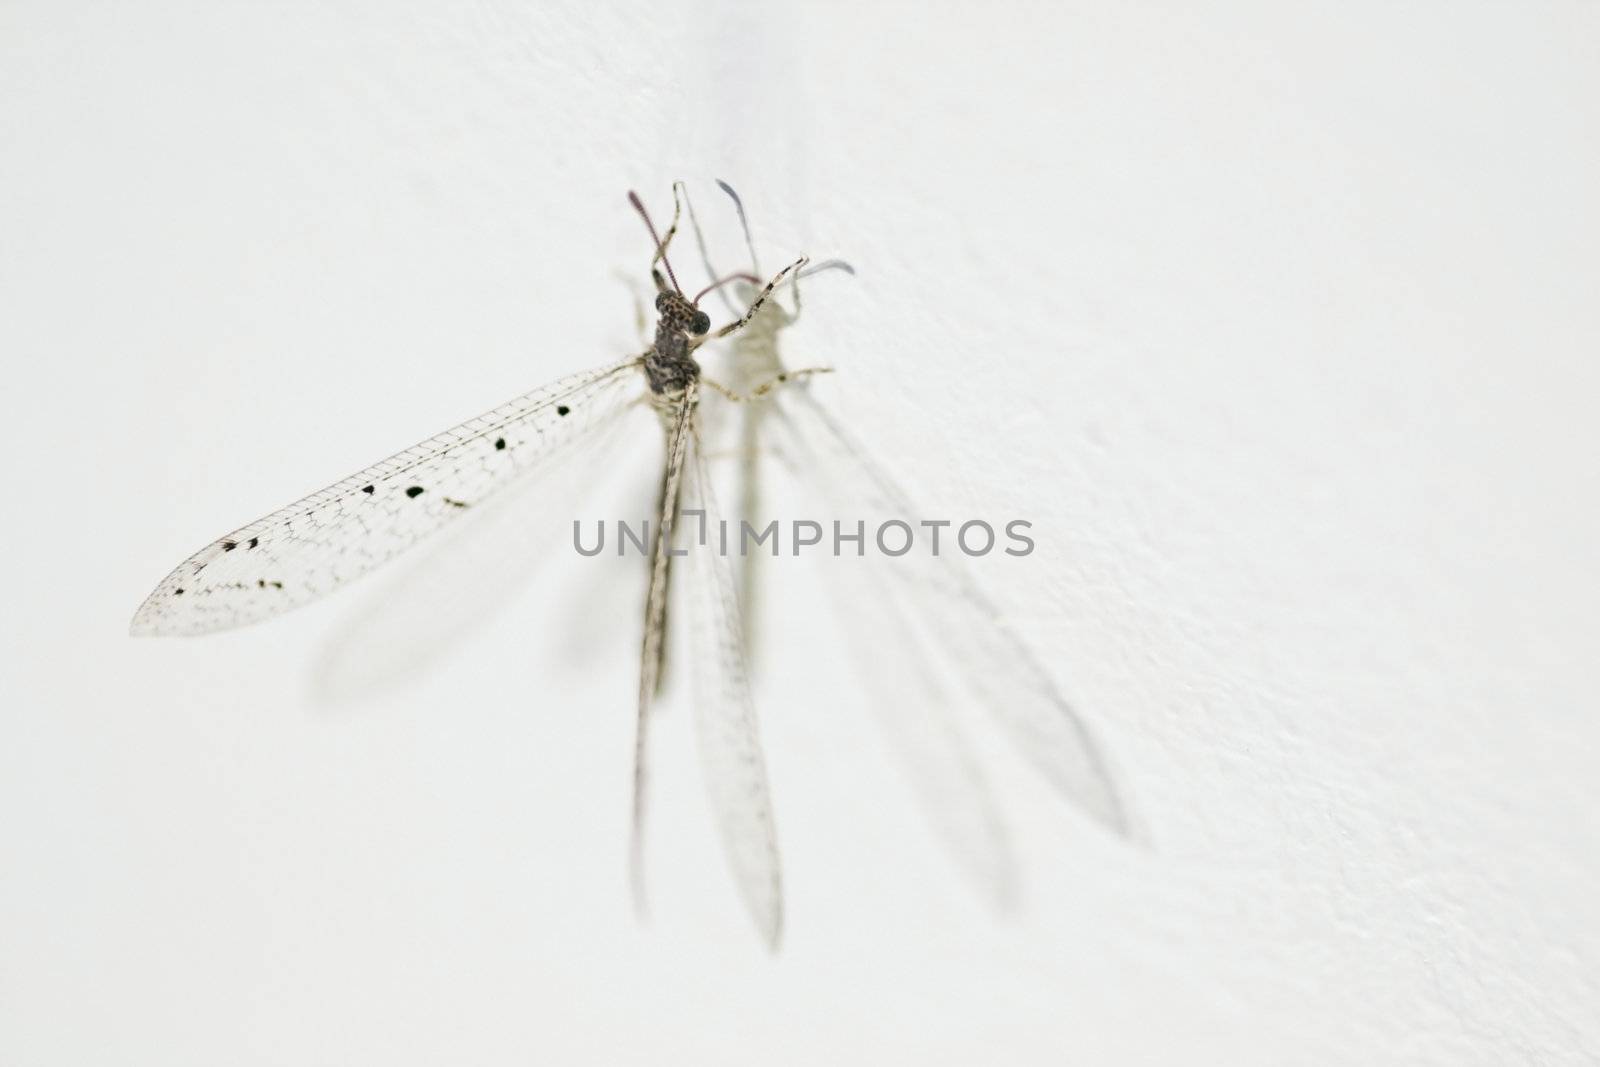 Dragonfly on a wall by ChrisAlleaume